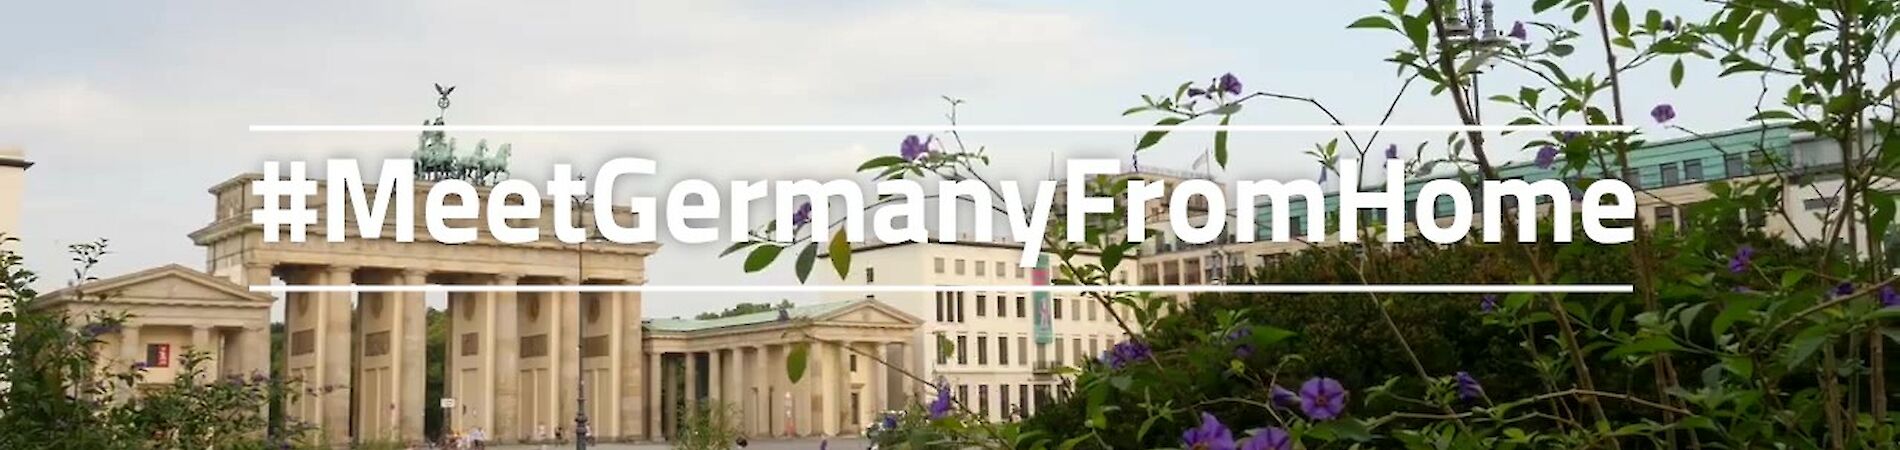 Visual of the GCB campaign "#MeetGermanyFromHome", the Brandenburg Gate can be seen in the background.